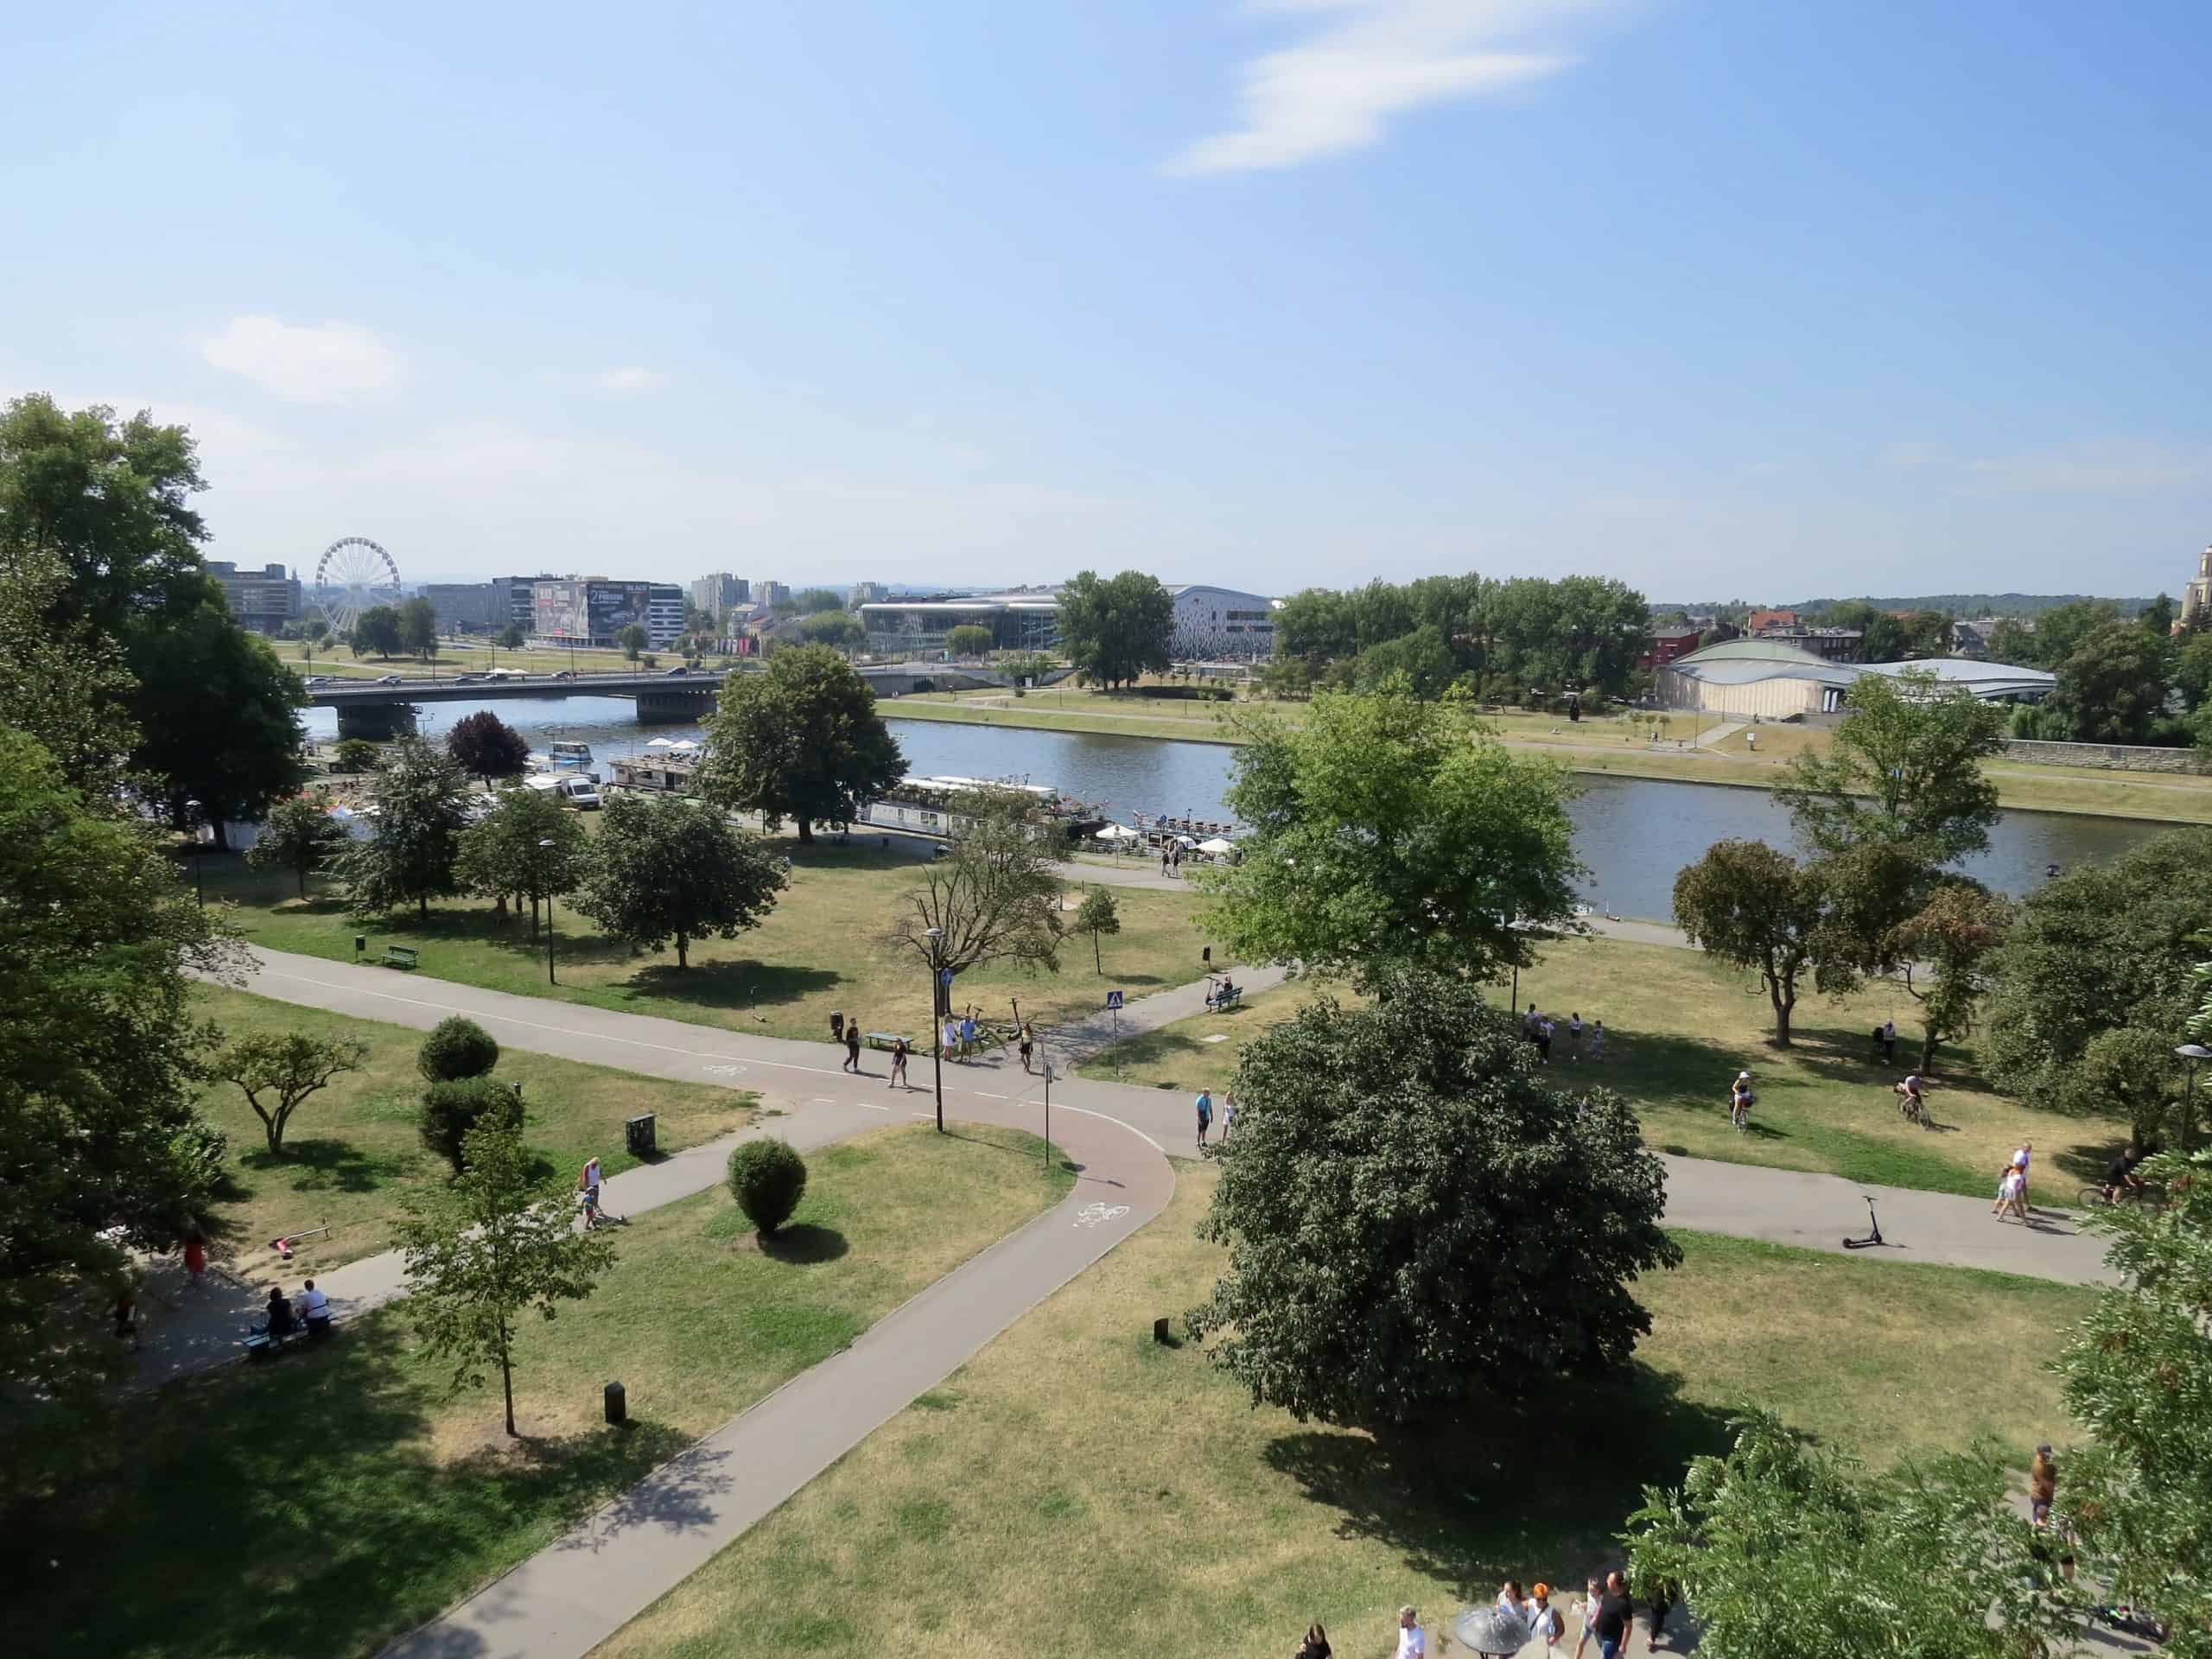 Vistula (Wisła) River is where the locals hang out. Things to do in Krakow include walking along the riverfront